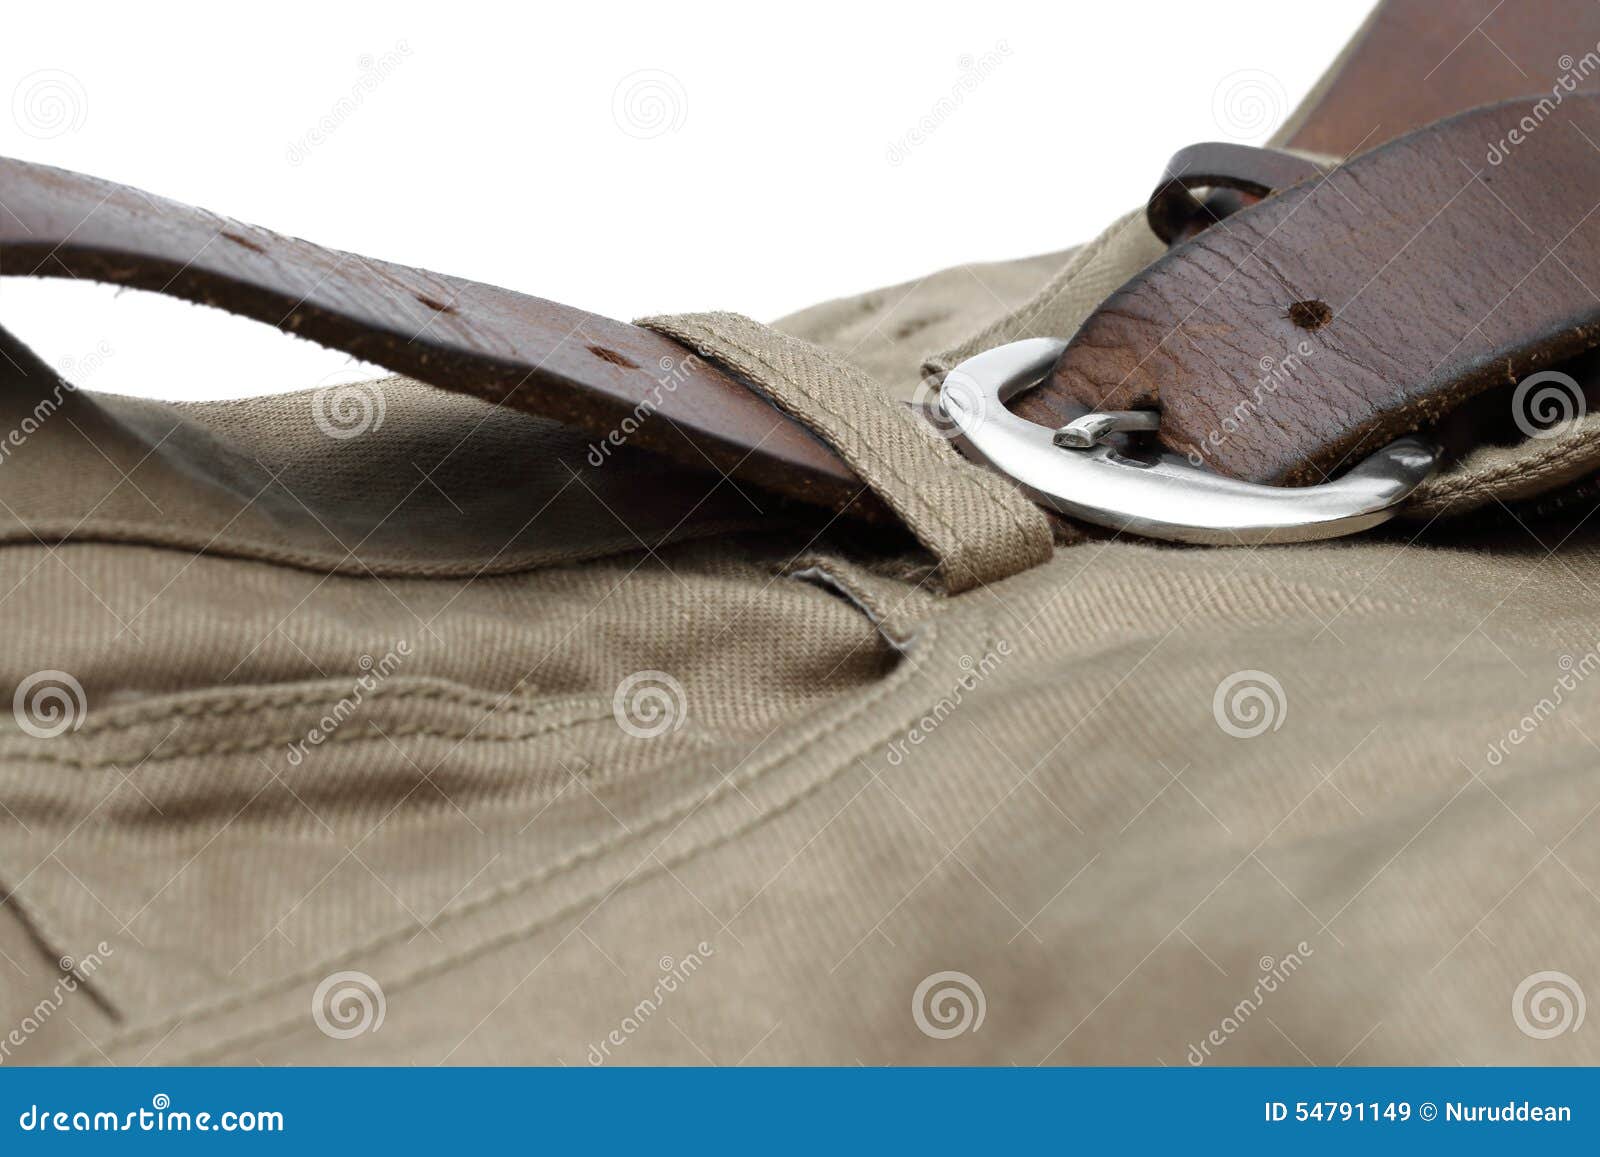 Old brown belt with jeans stock image. Image of person - 54791149